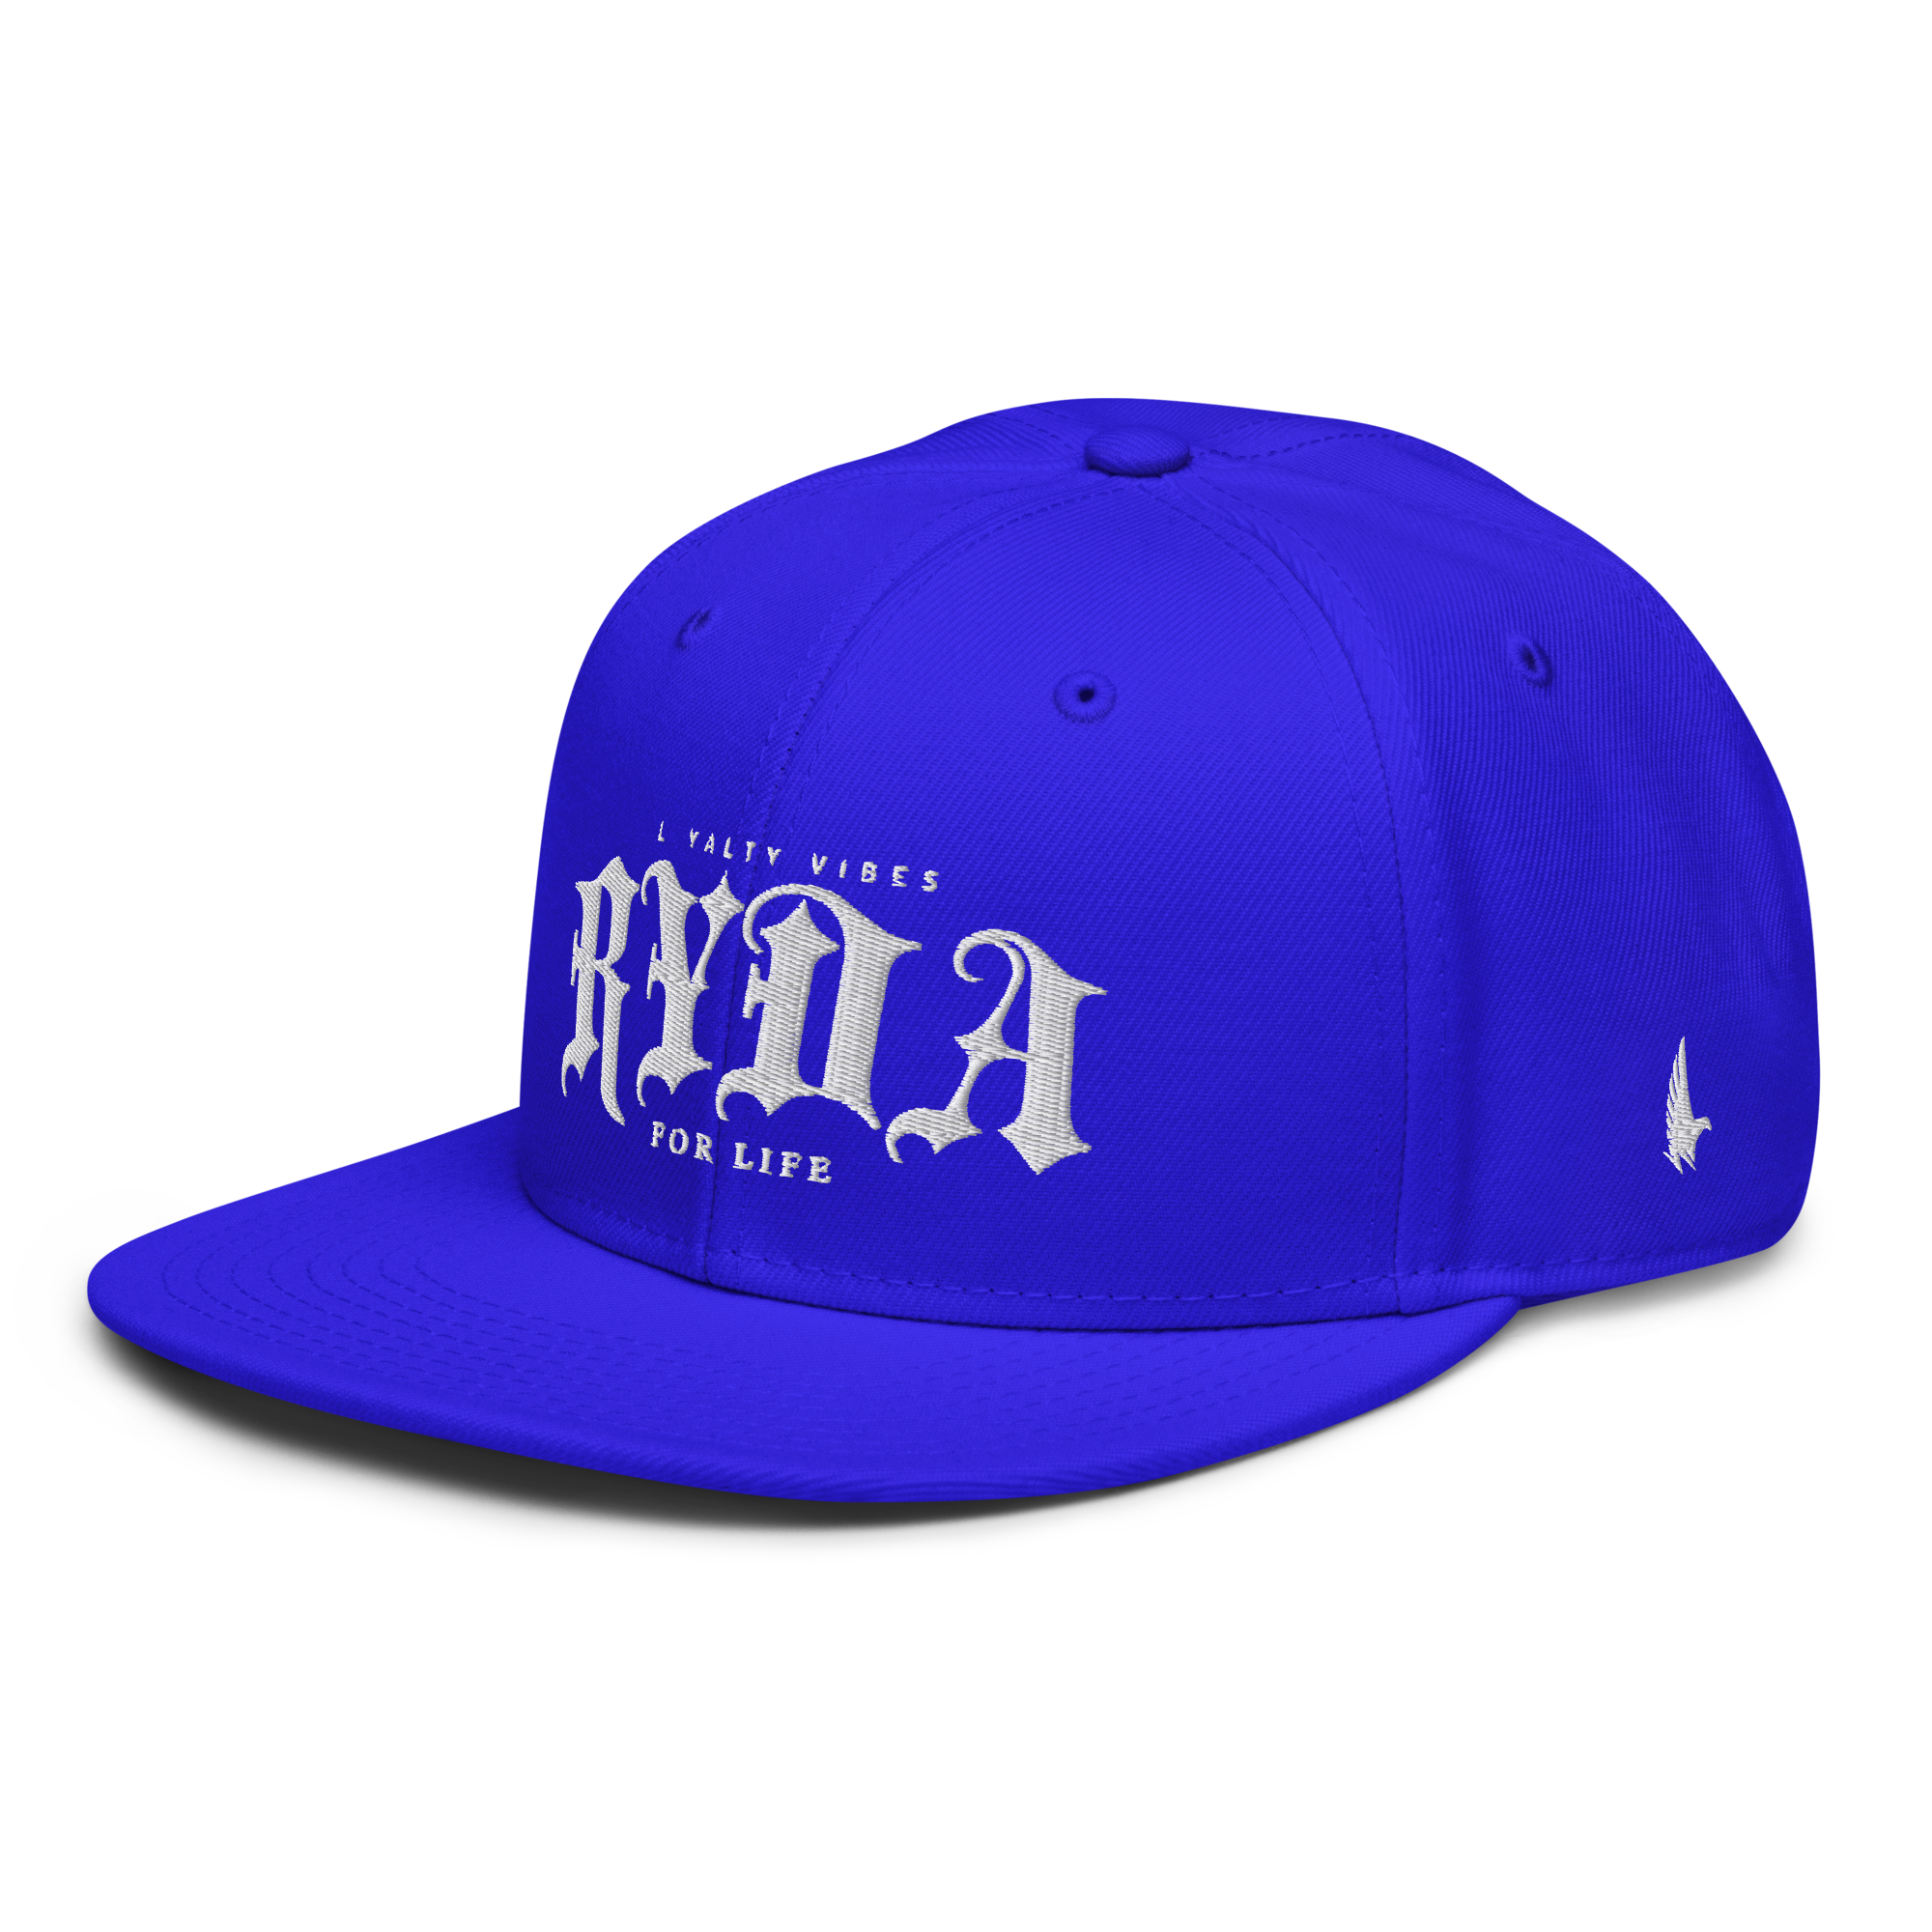 Ryda For Life Snapback Hat - Blue/White - Loyalty Vibes